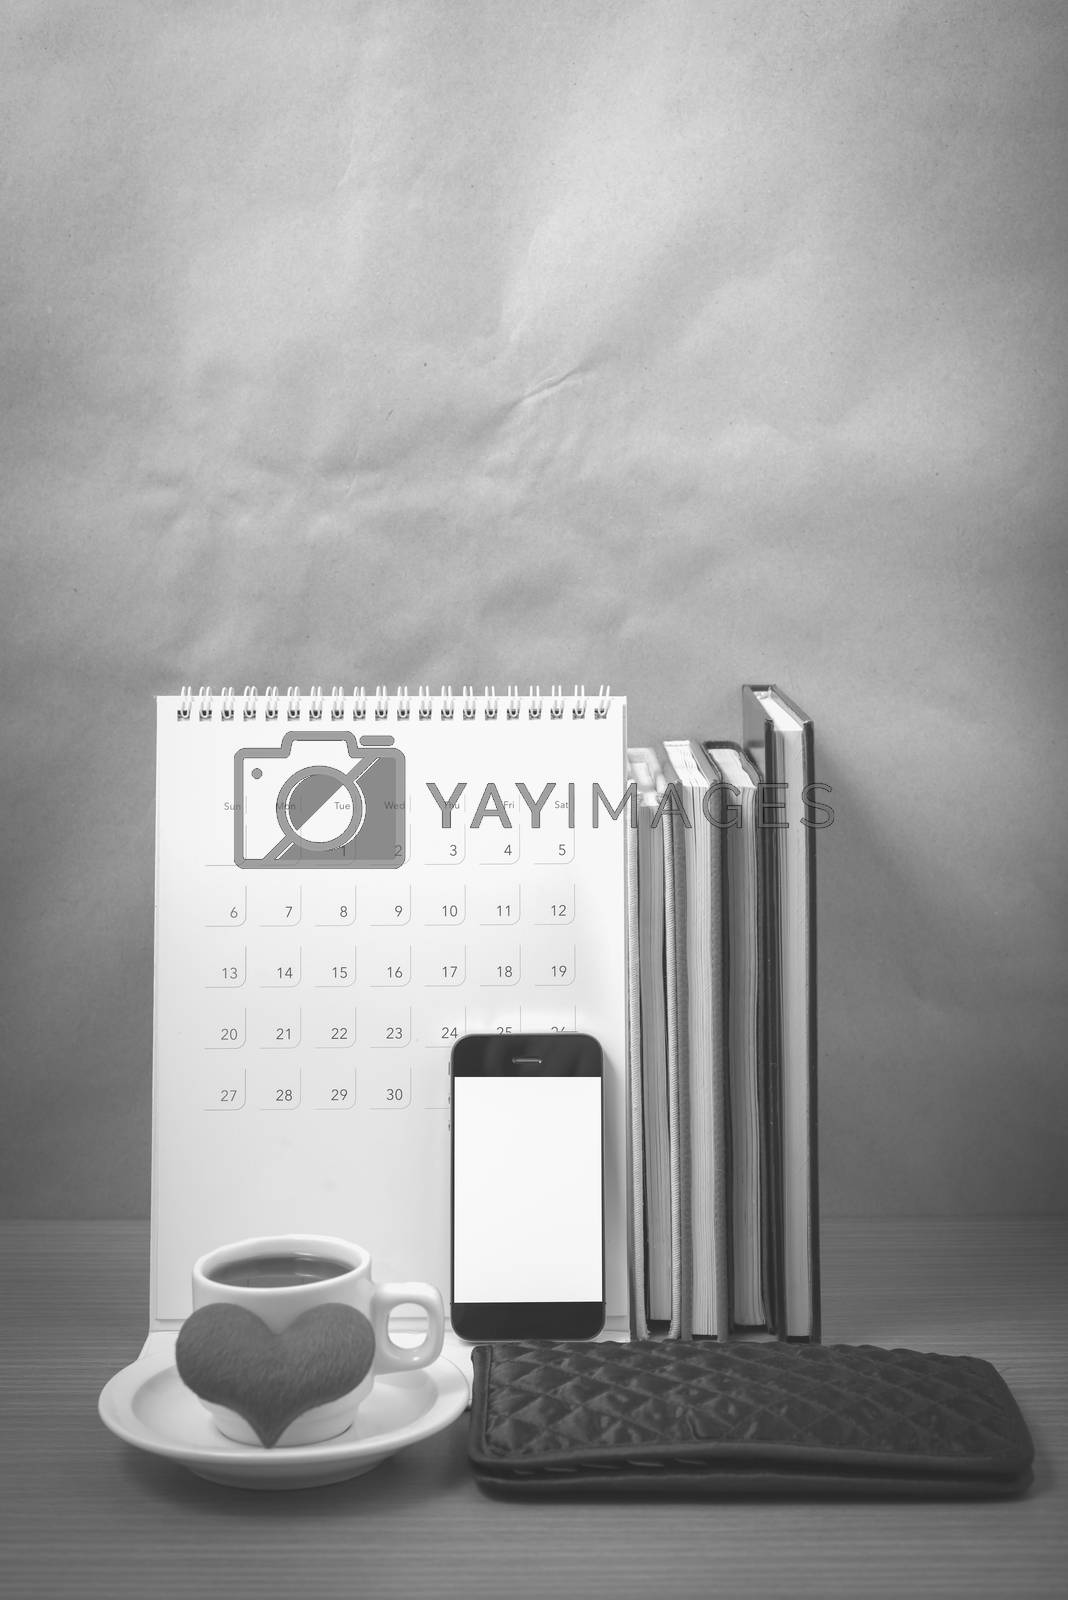 Royalty free image of office desk : coffee with phone,wallet,calendar,heart,stack of b by ammza12